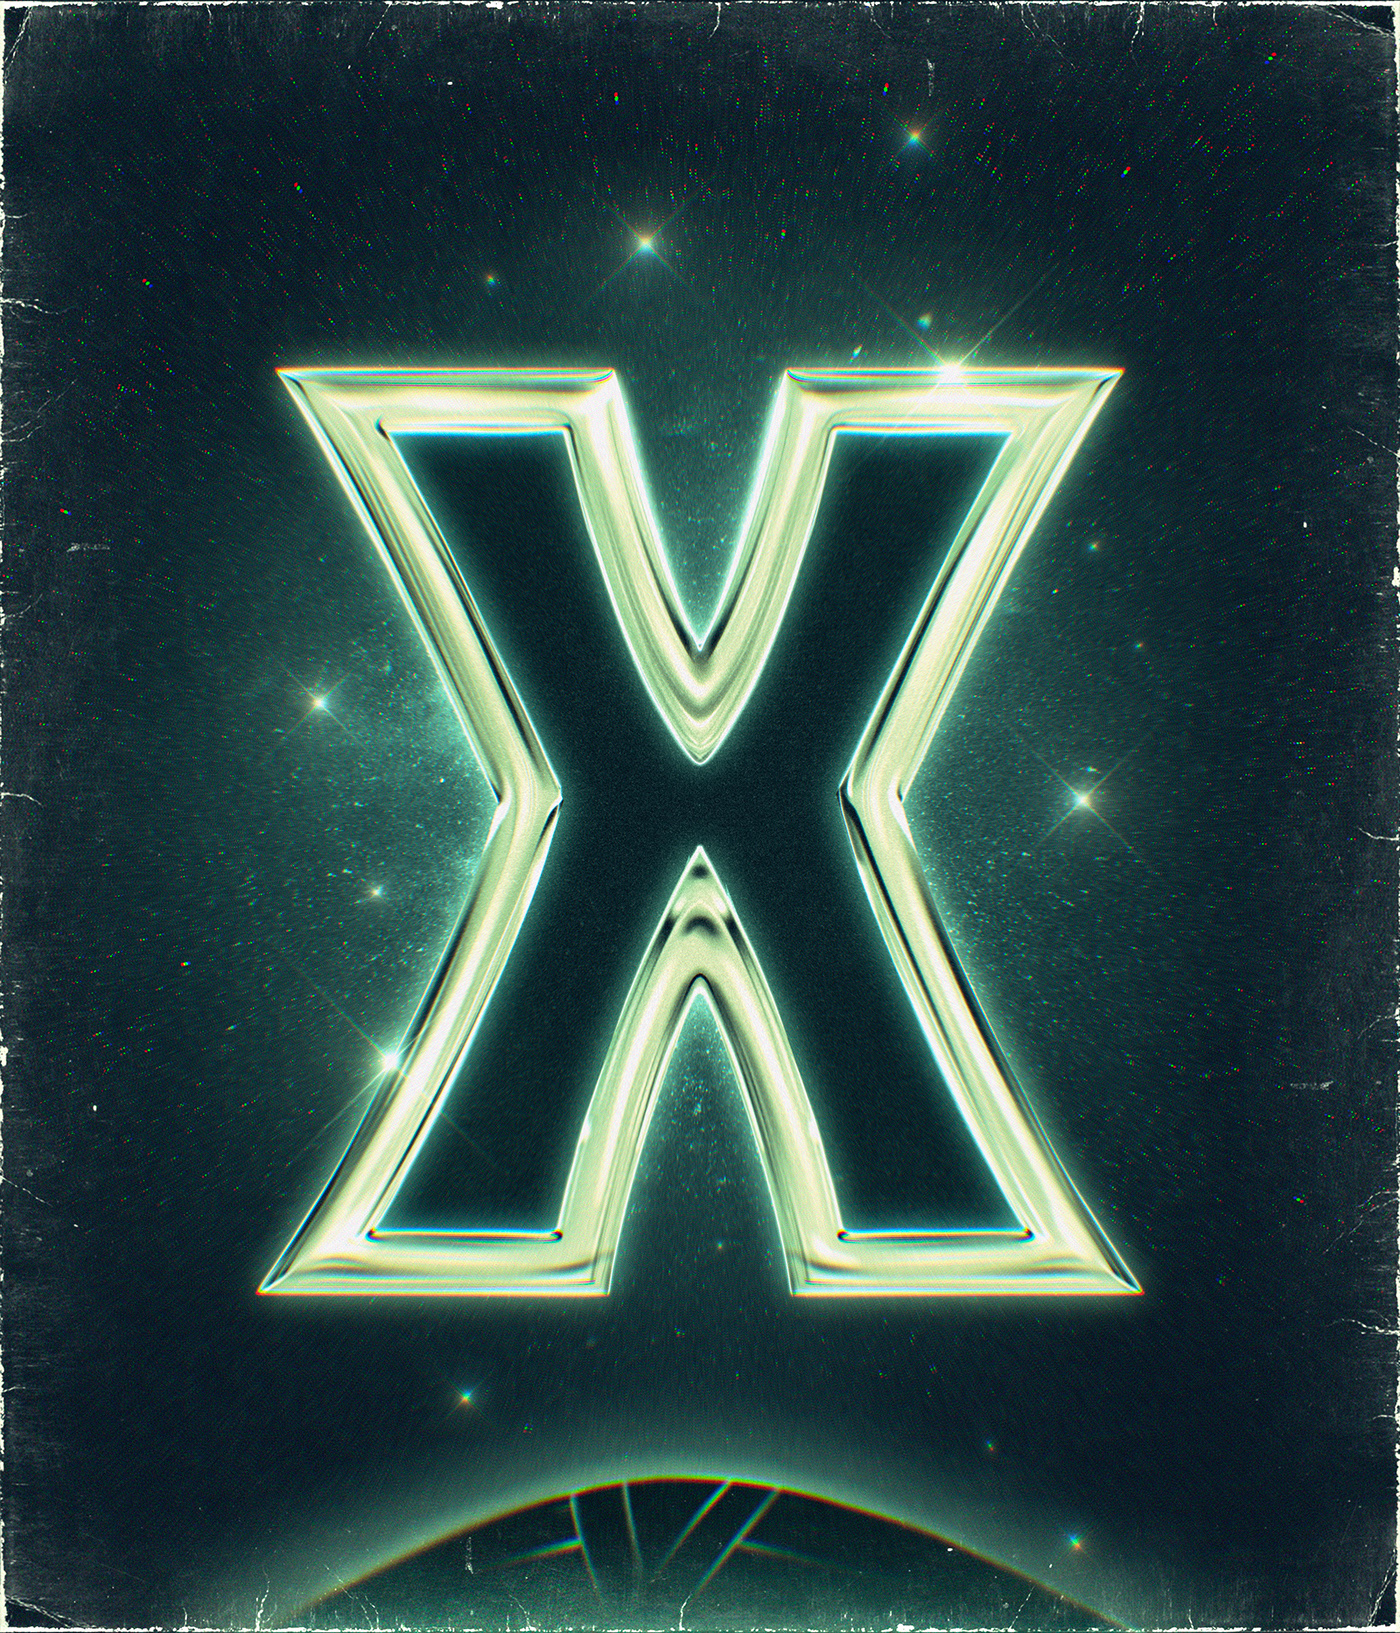 Digital Lettering of the letter X for X-Files